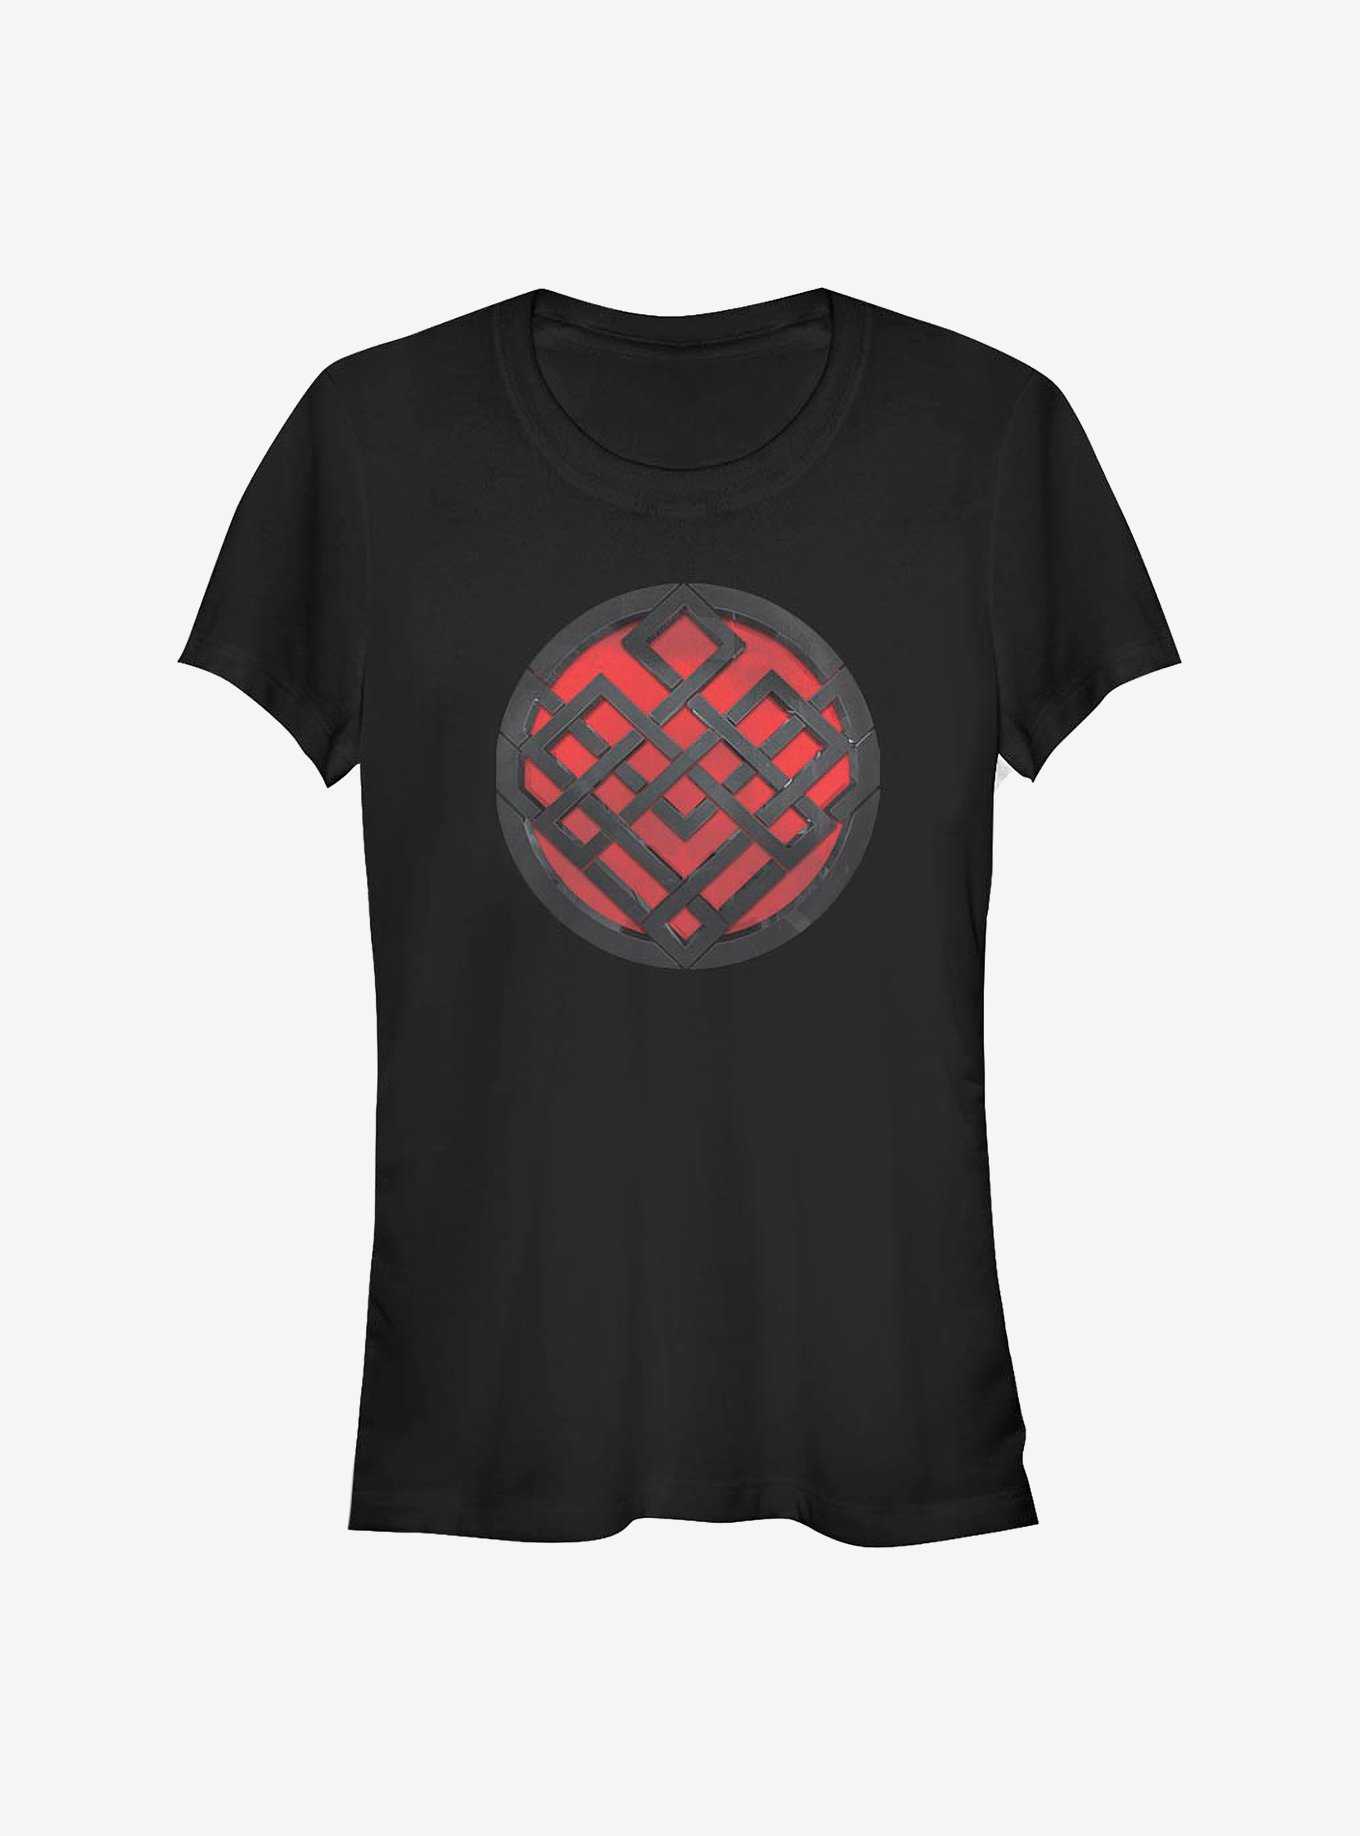 Marvel Shang-Chi And The Legend Of The Ten Rings Rendered Symbol Girls T-Shirt, , hi-res